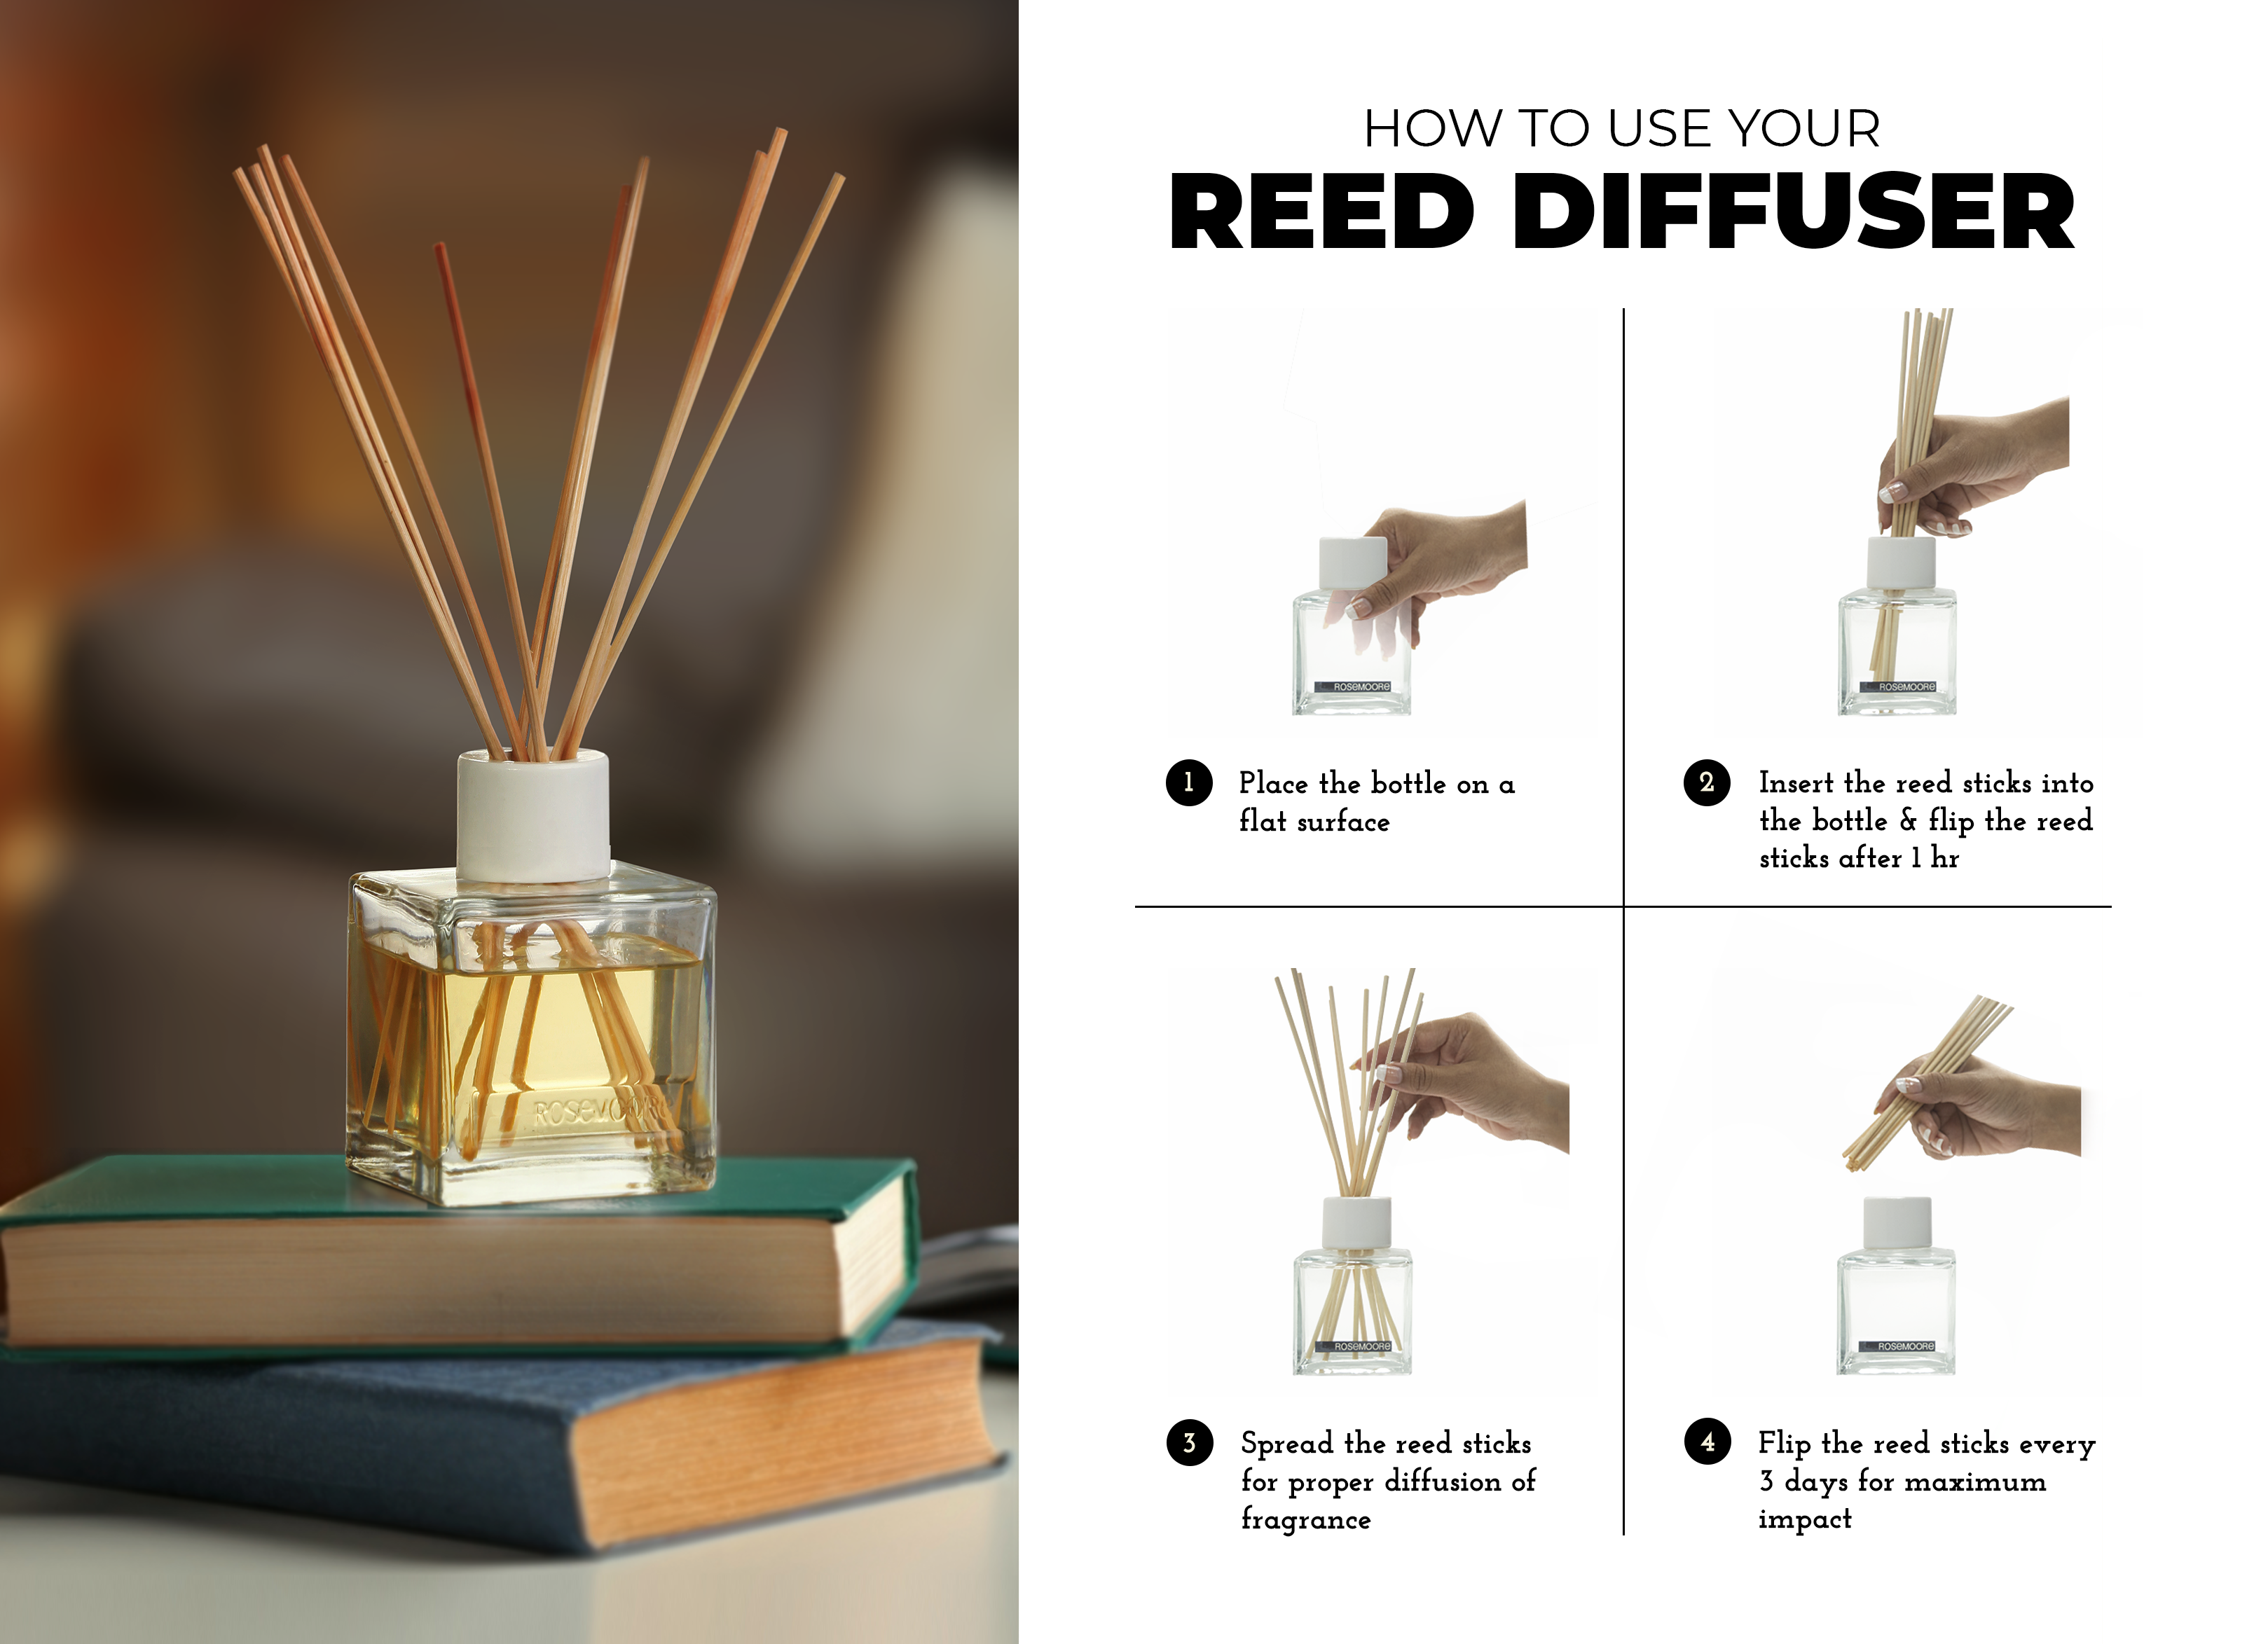 Buy Reed Diffuser Refill oil online.